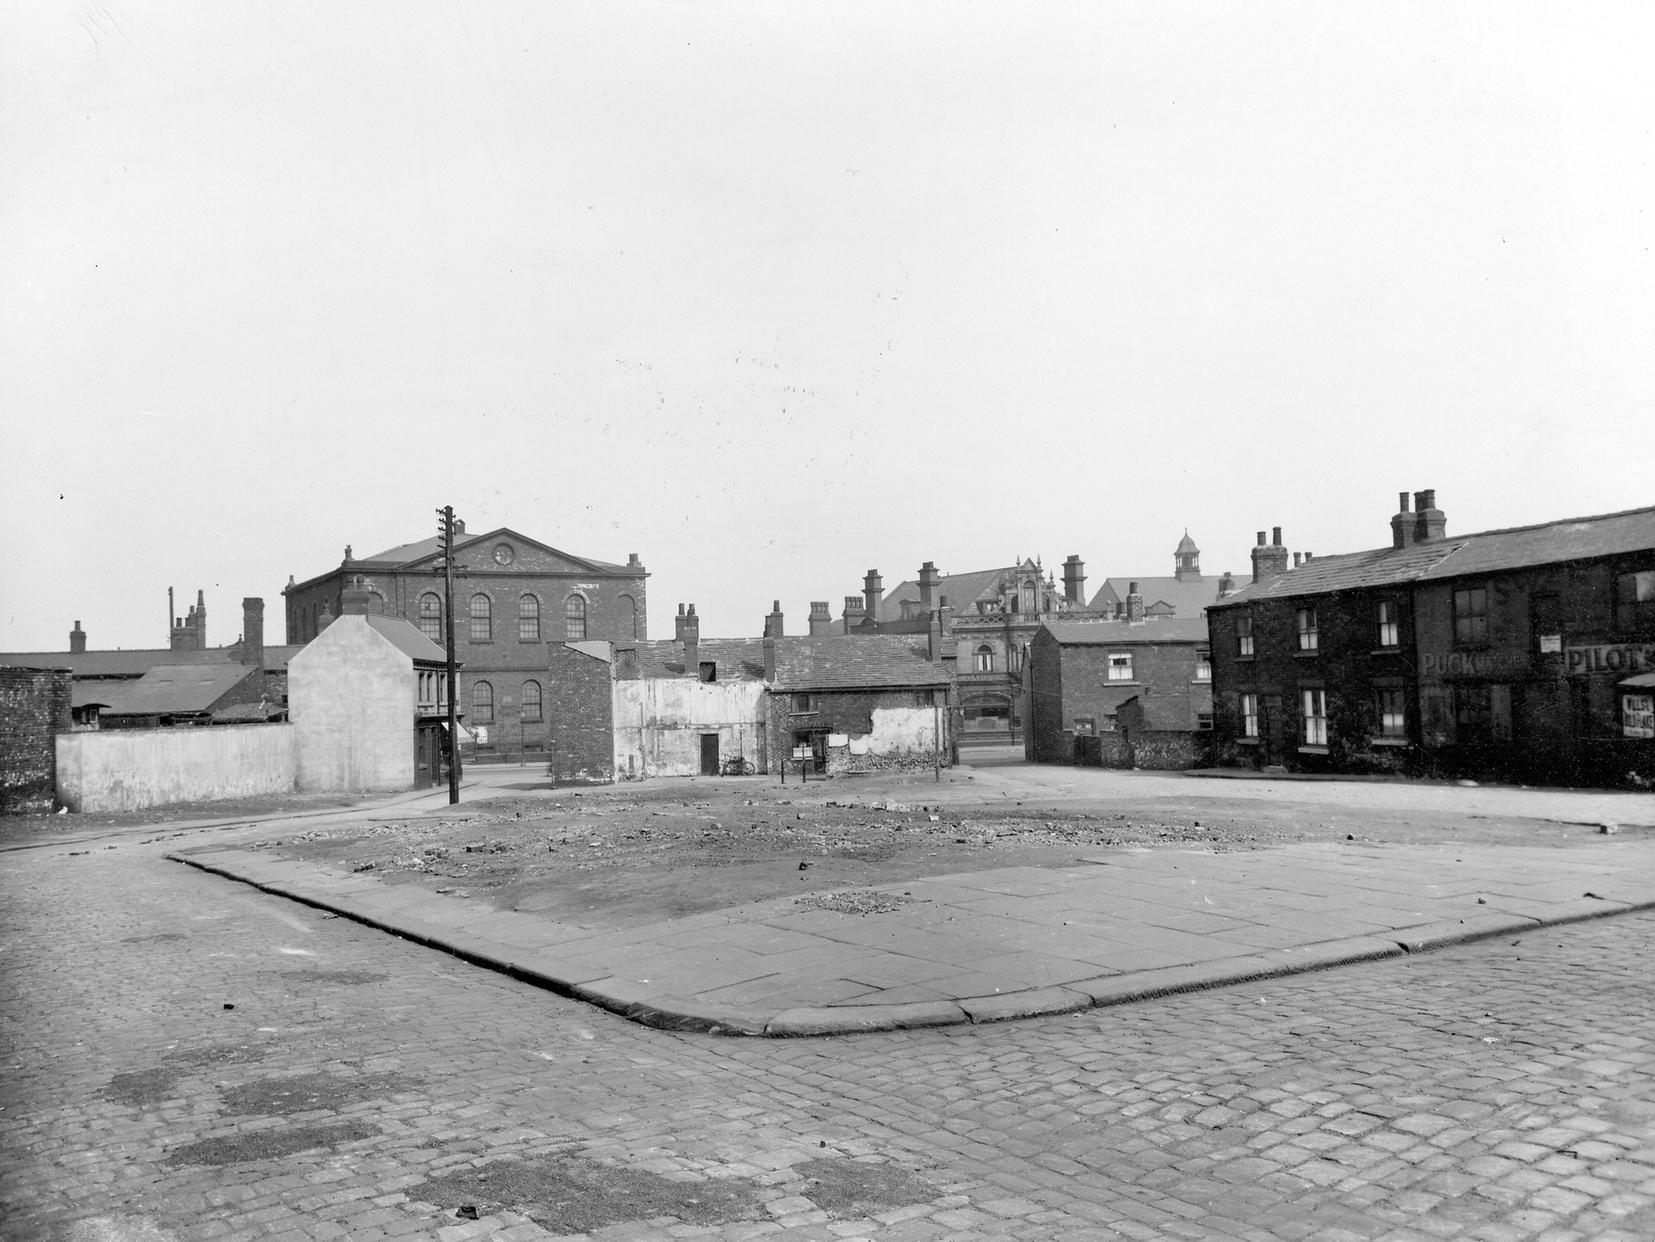 A view from Albion Terrace across waste ground, to Waterloo Road. The Garden Gate pub is just visible.